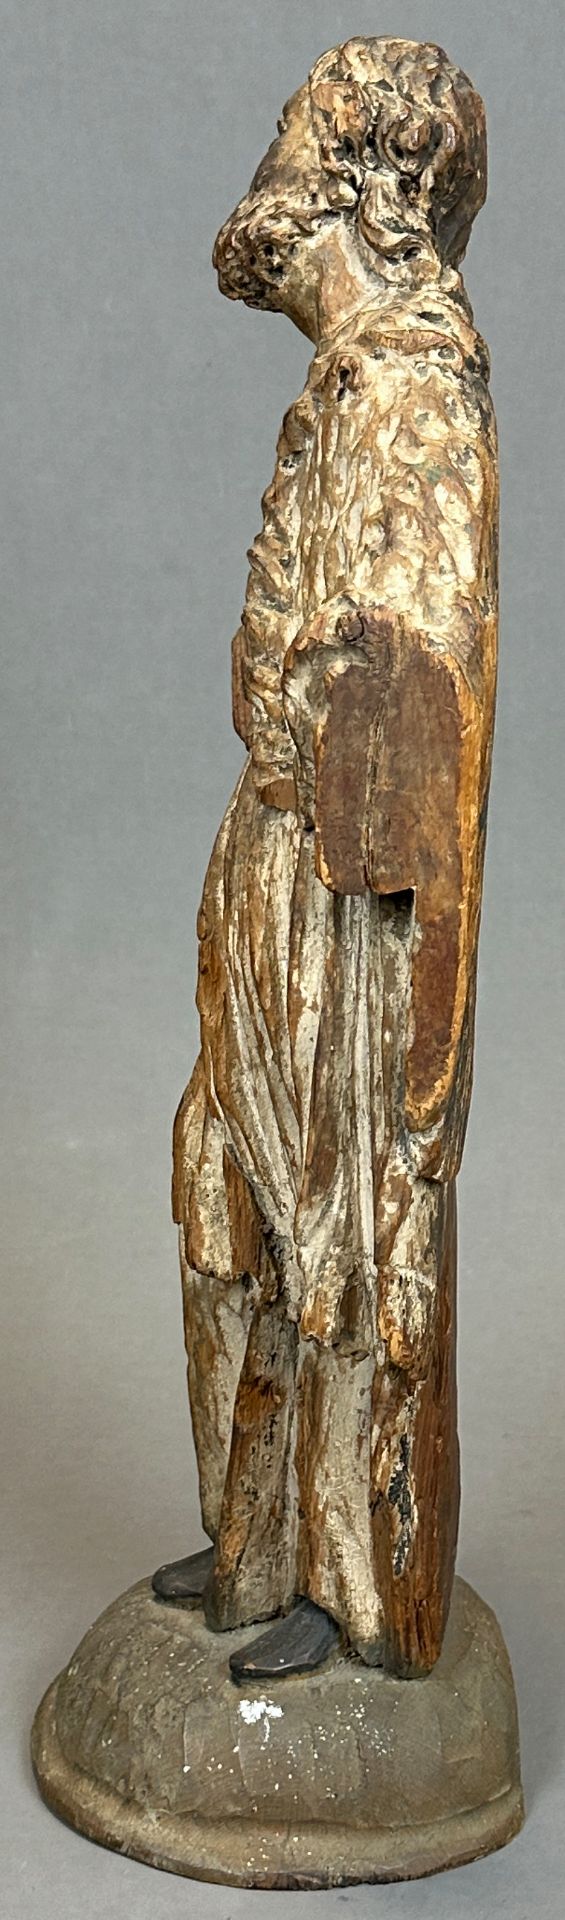 Wooden figure. St Nepomuk. Mid 16th century. Franconia. - Image 2 of 11